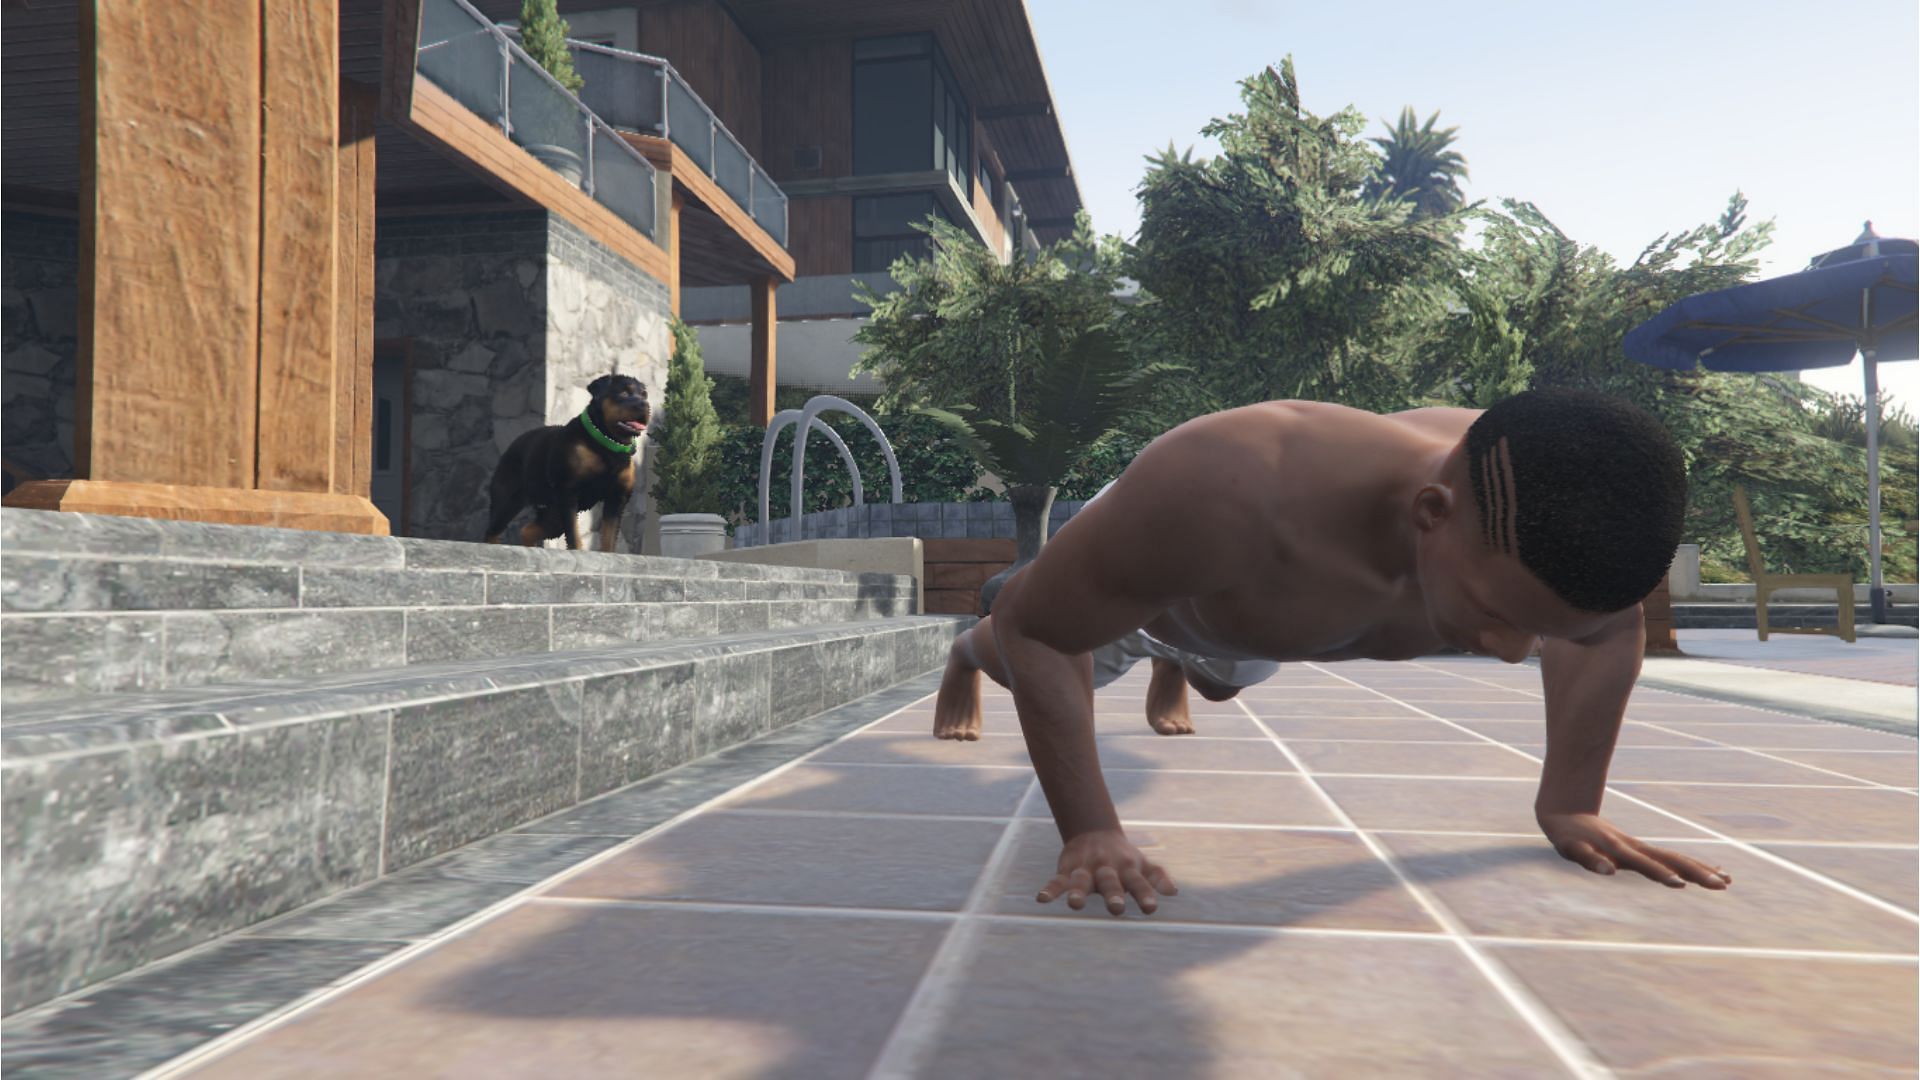 Franklin doing push-ups in his house (Image via andre500)